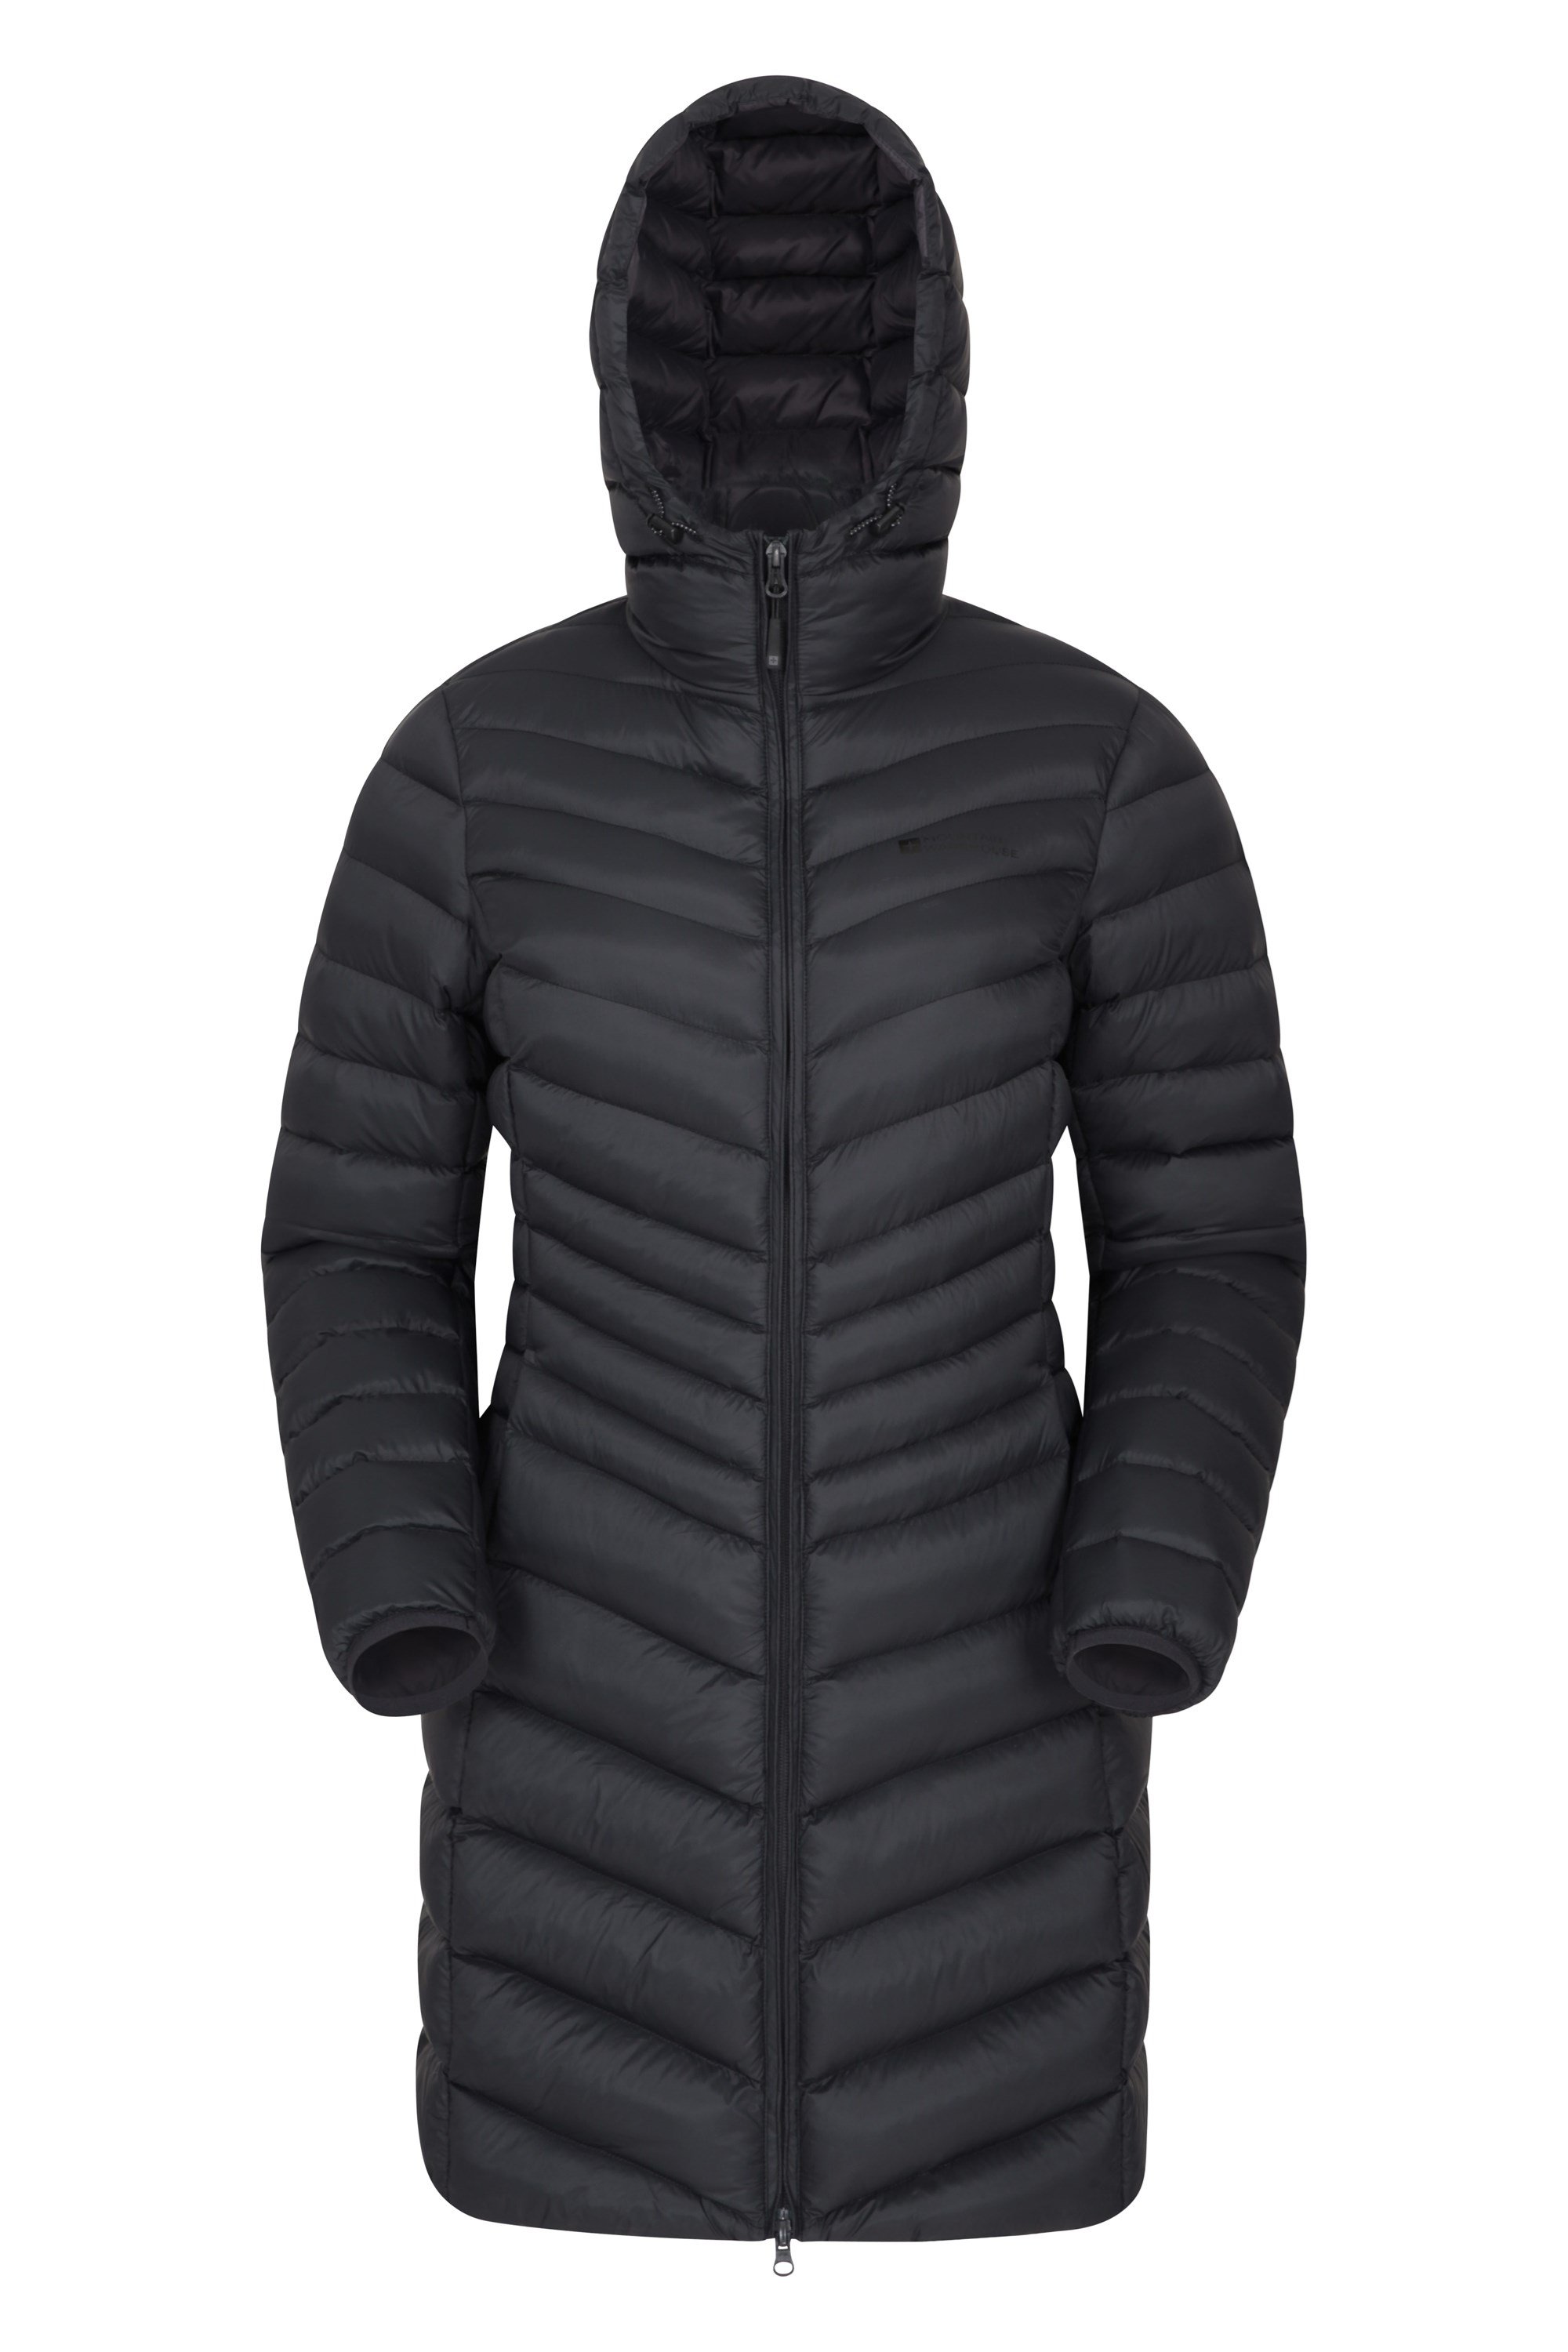 go outdoors ladies padded jackets